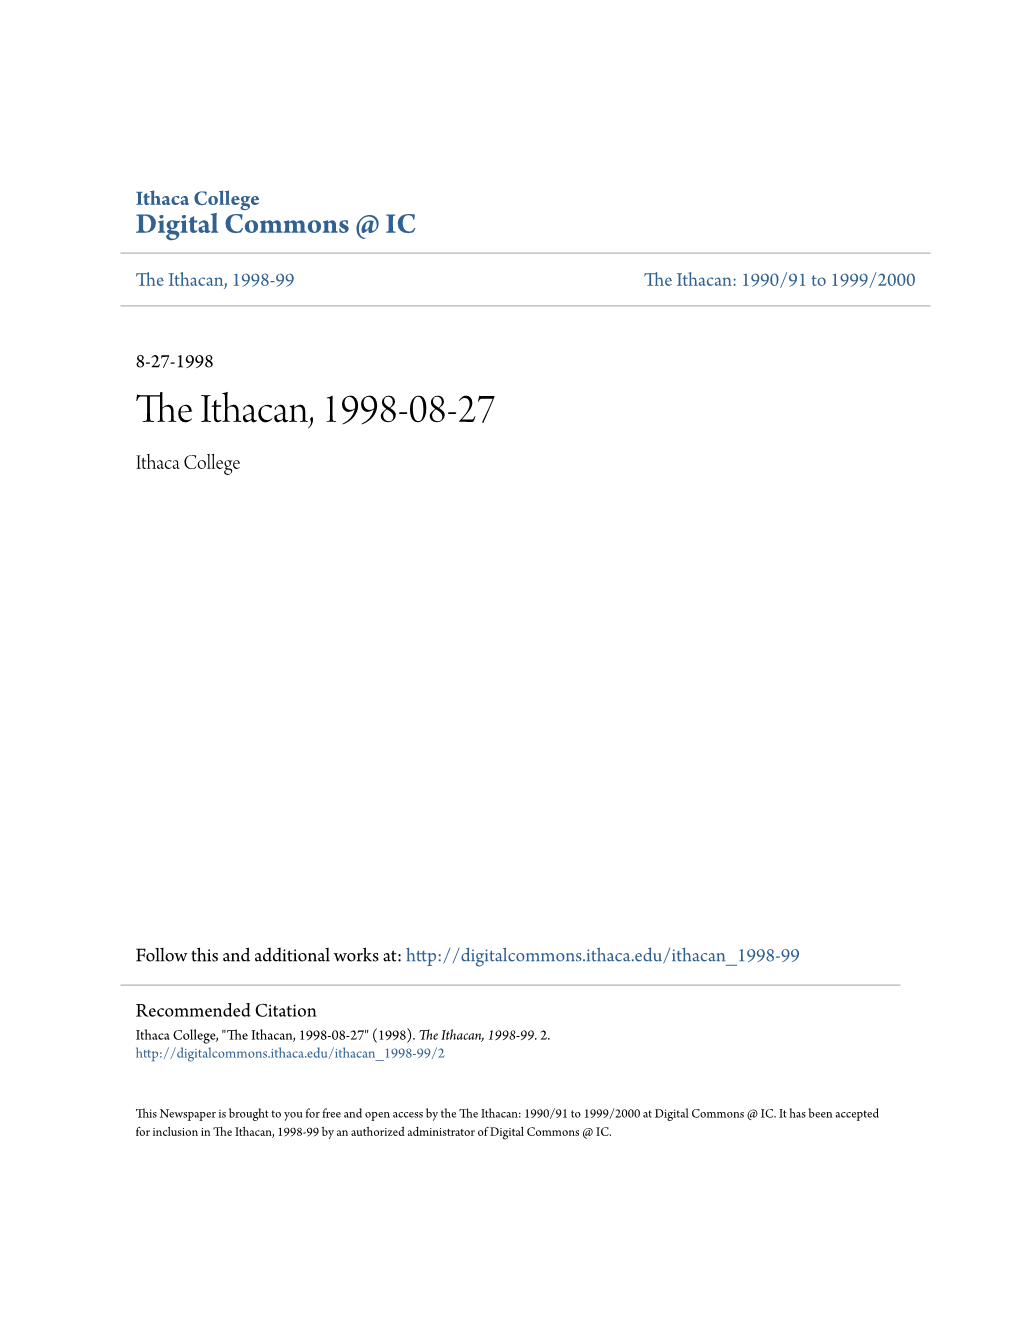 The Ithacan, 1998-08-27